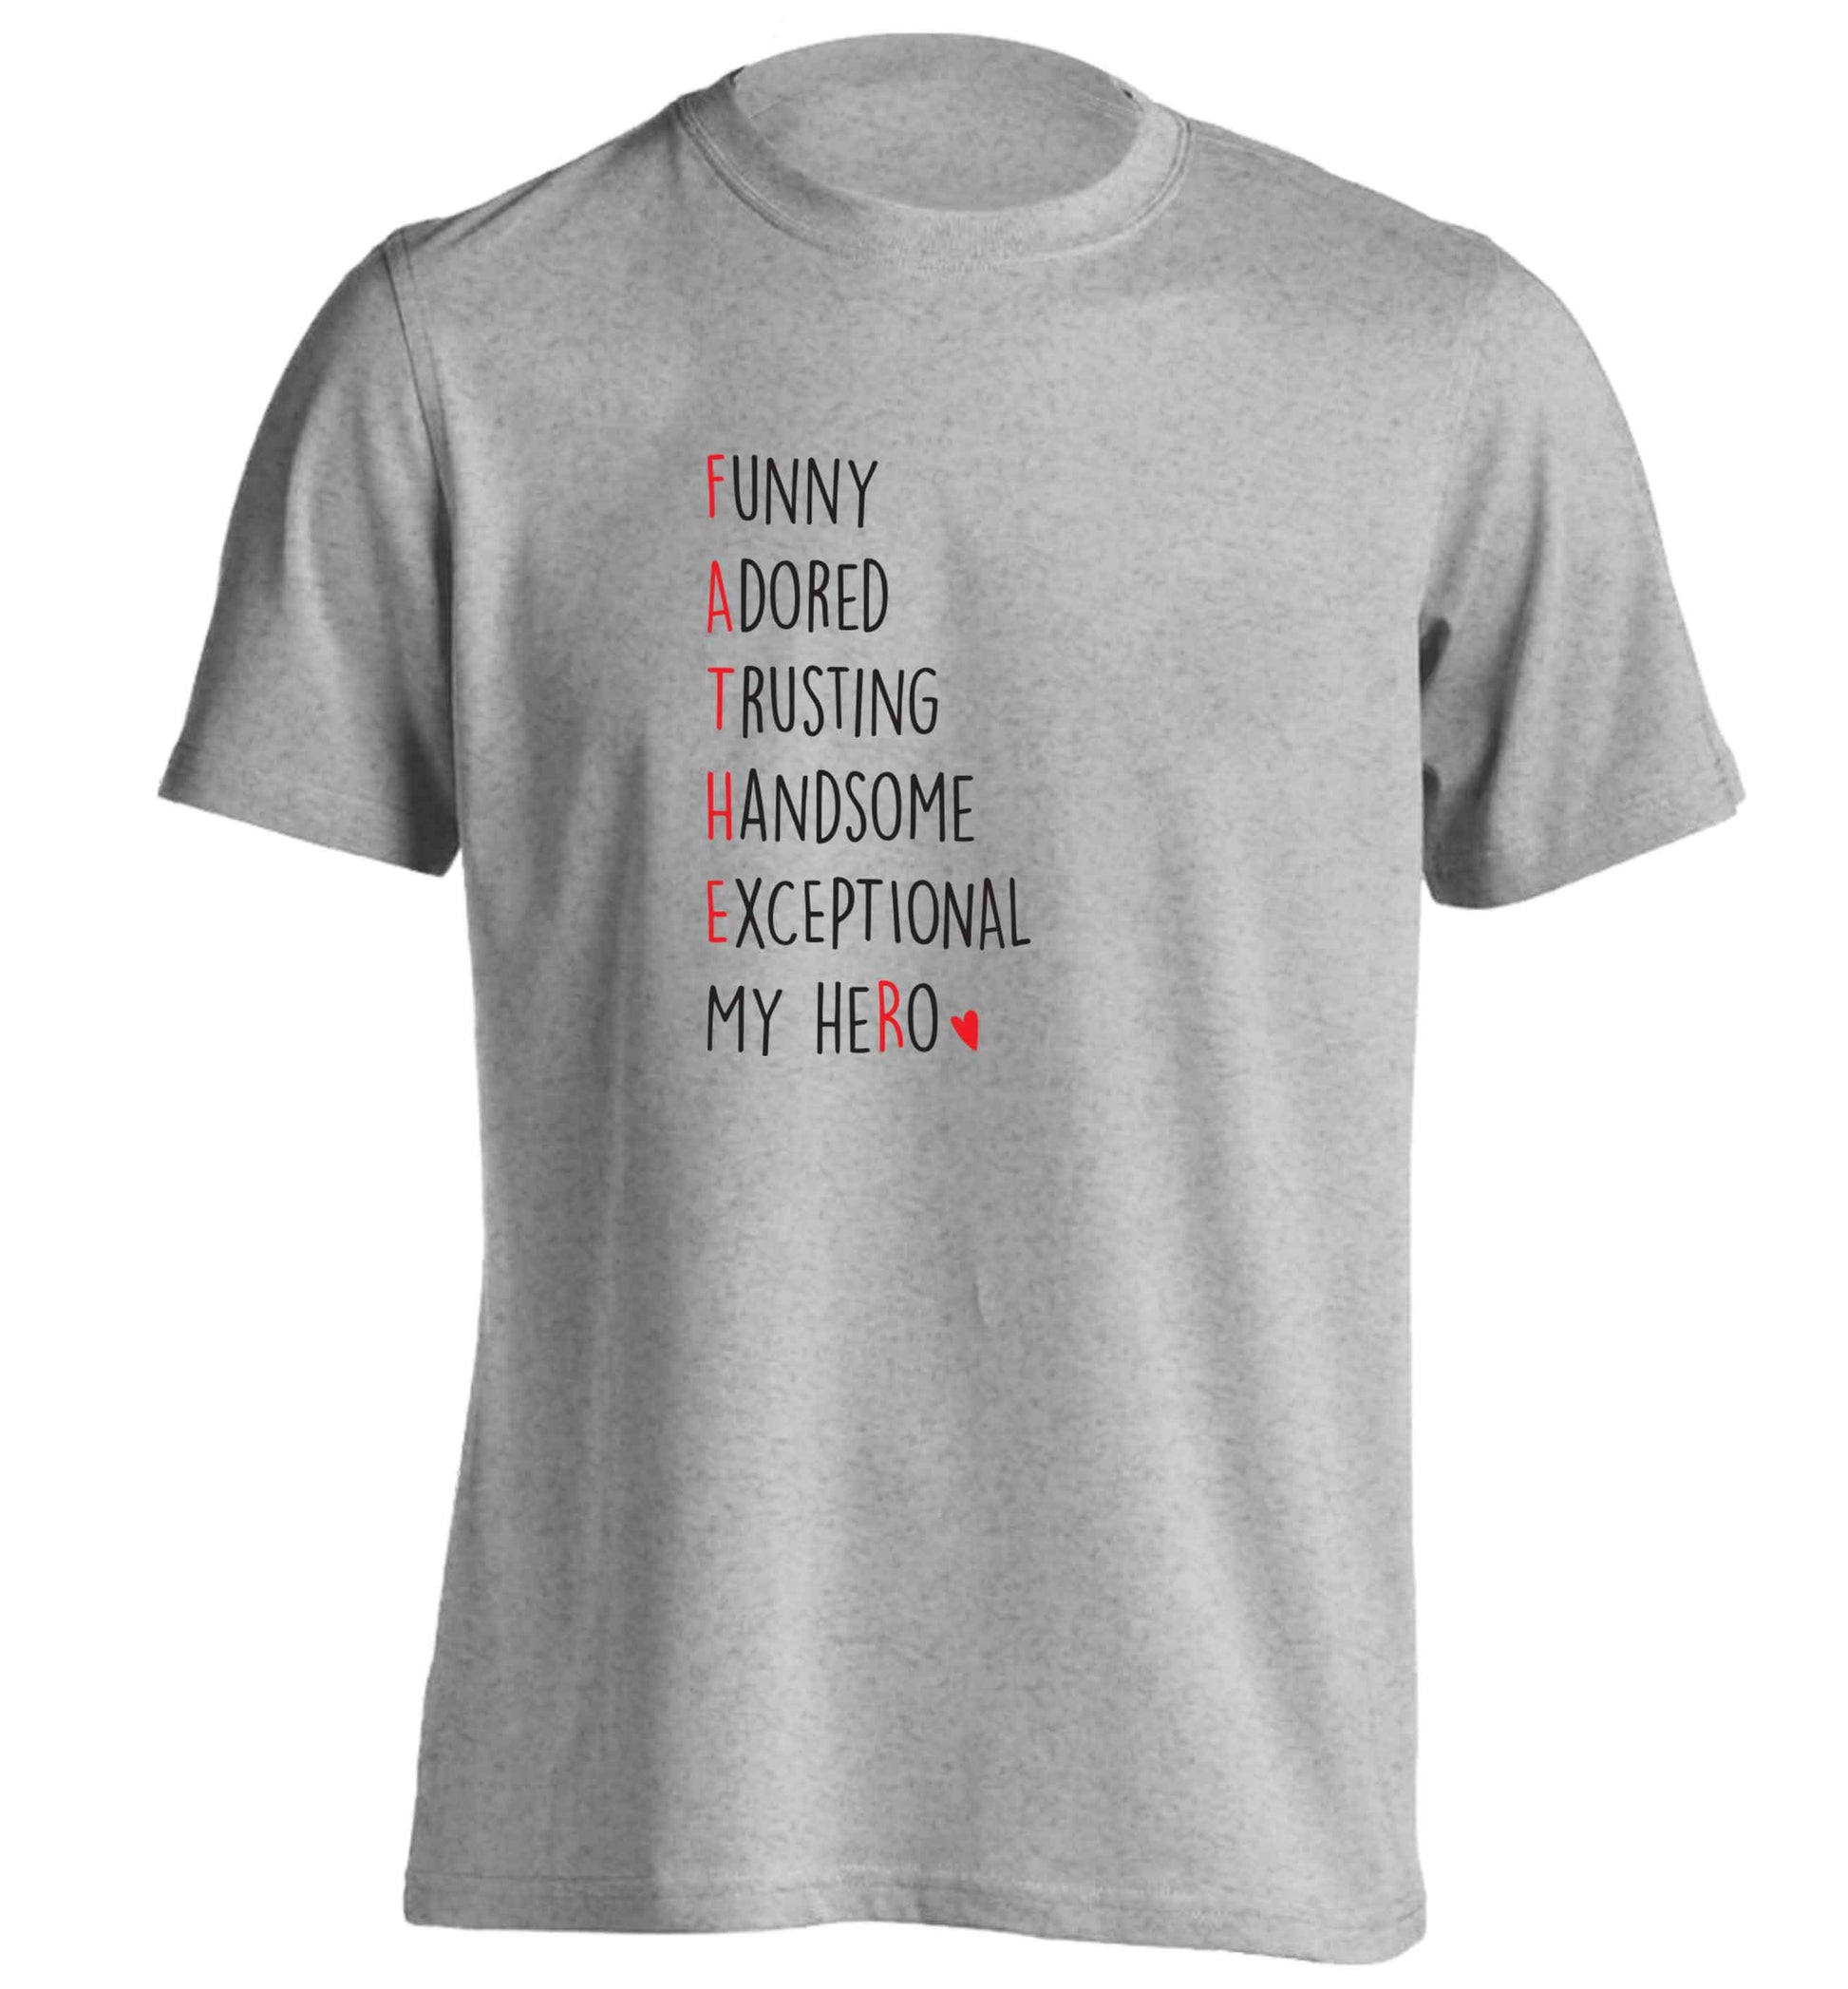 Father, funny adored trusting handsome exceptional my hero adults unisex grey Tshirt 2XL